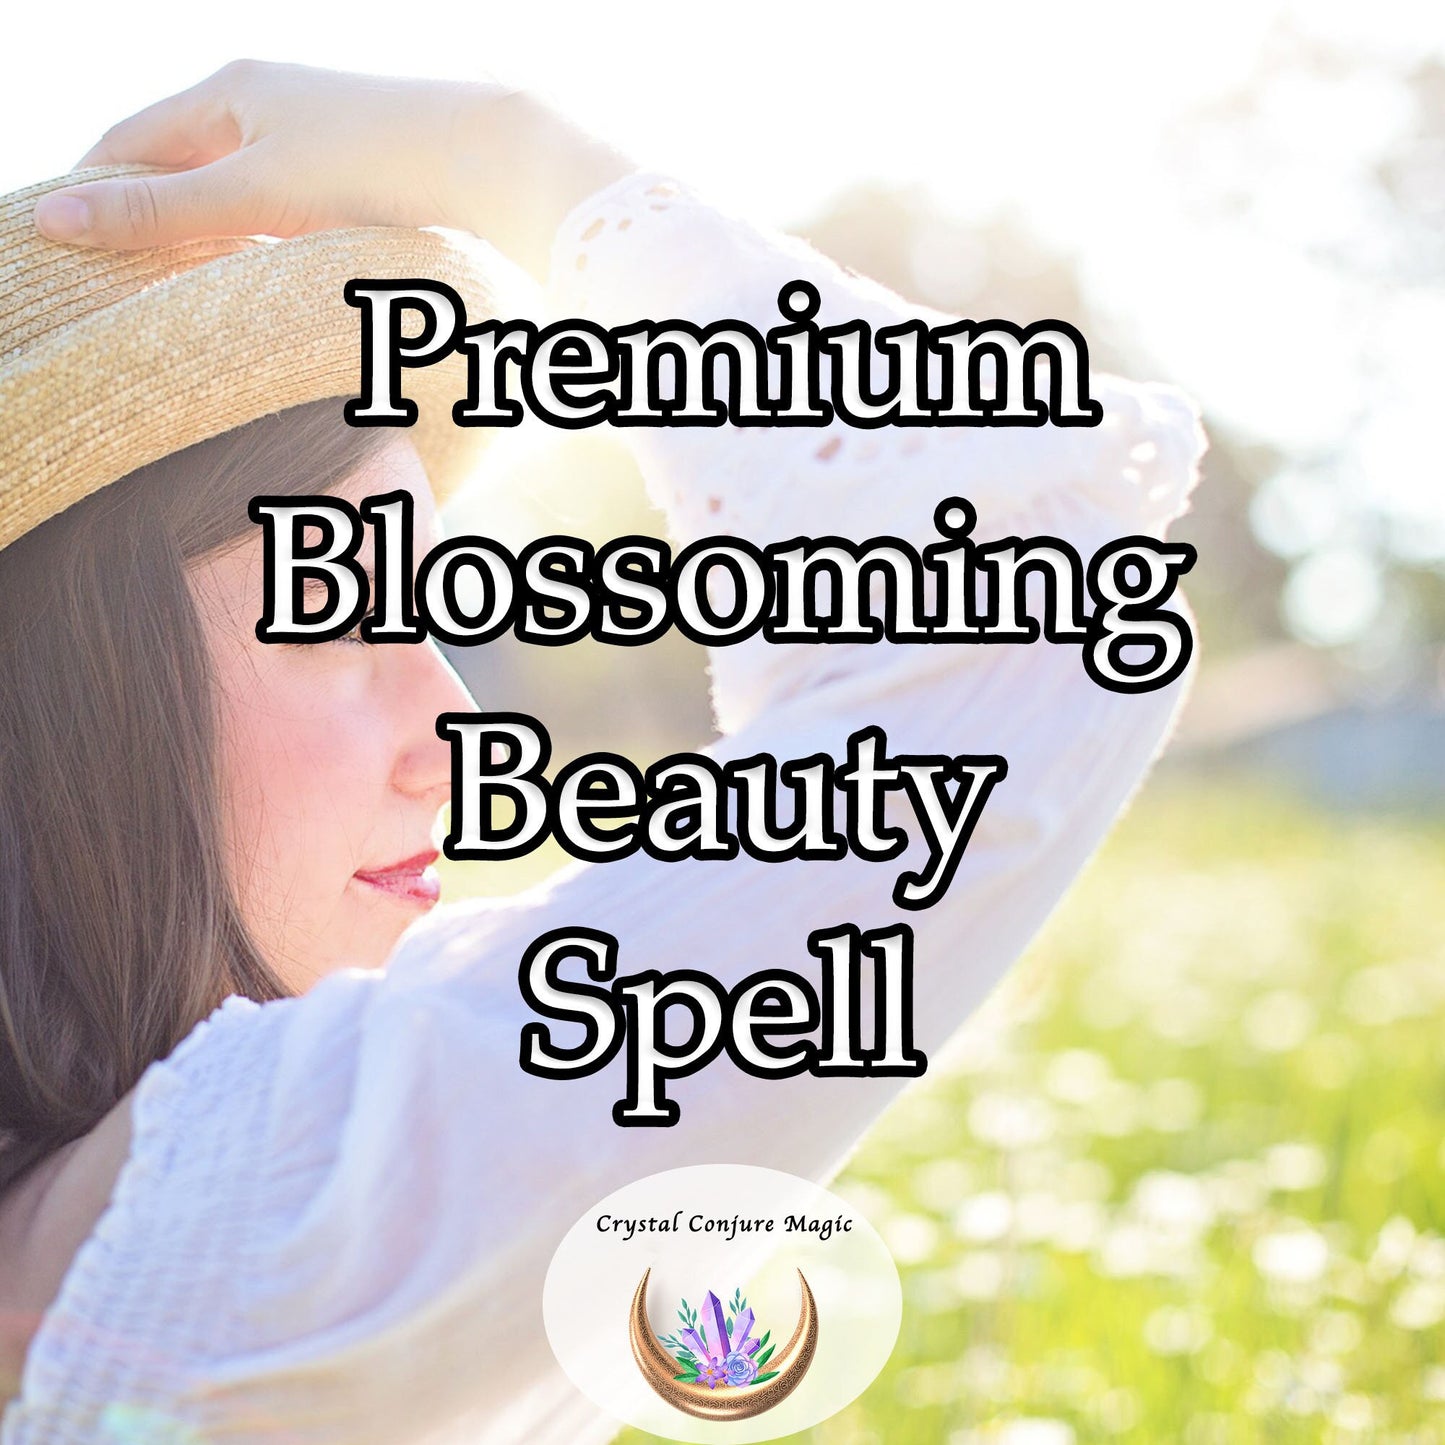 Premium Blossoming Beauty Spell - wake up feeling confident, empowered, and truly beautiful every single day